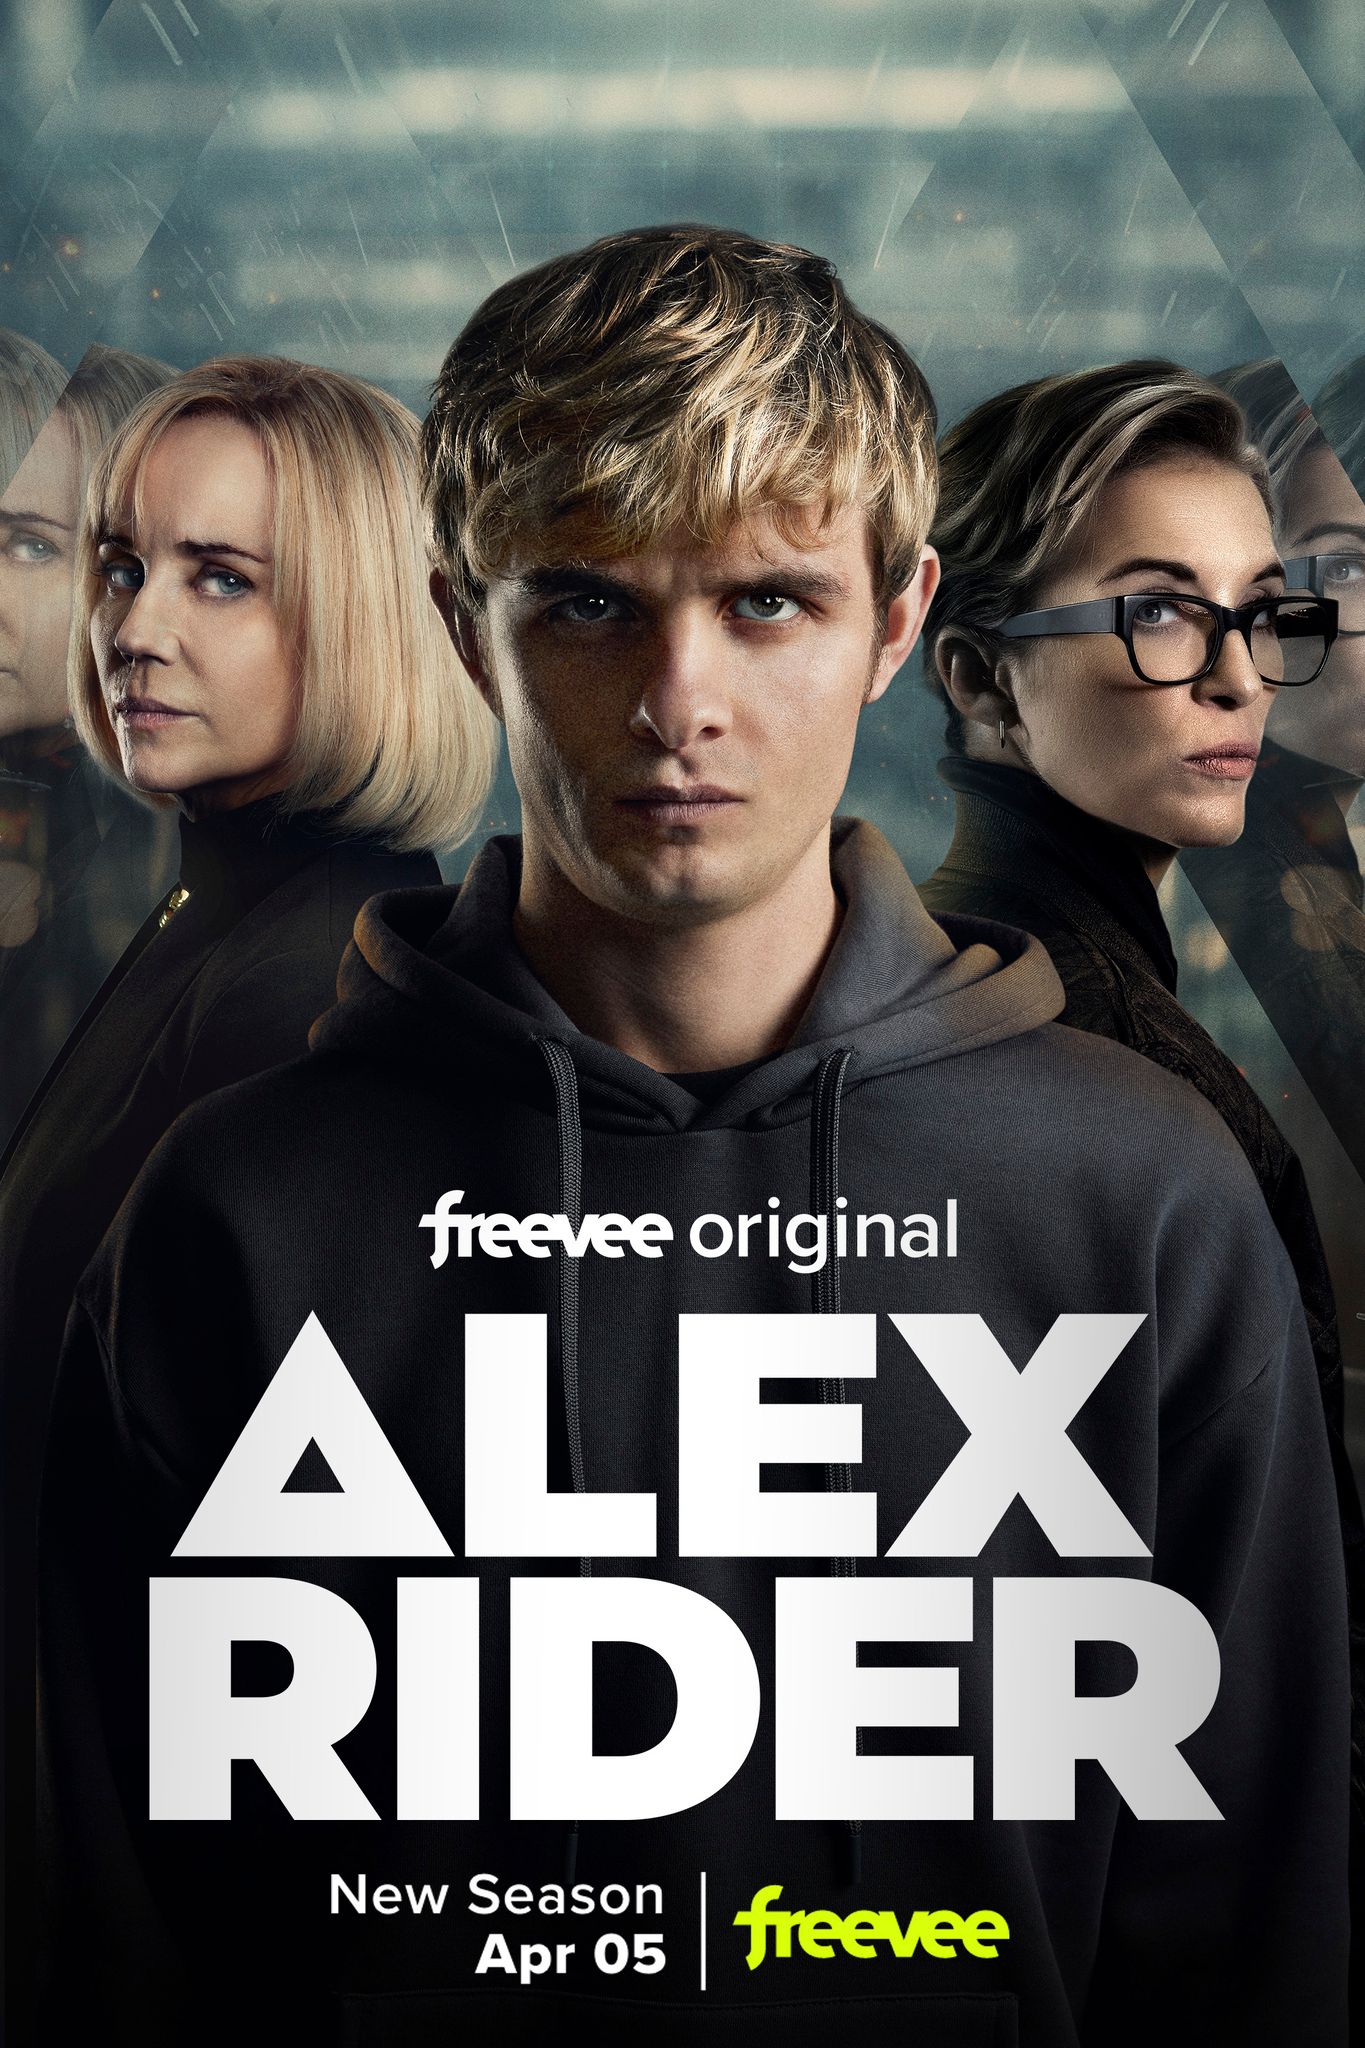 Alex Rider Season 3 Poster Showing Otto Farrant and Cast Split by a Mirror